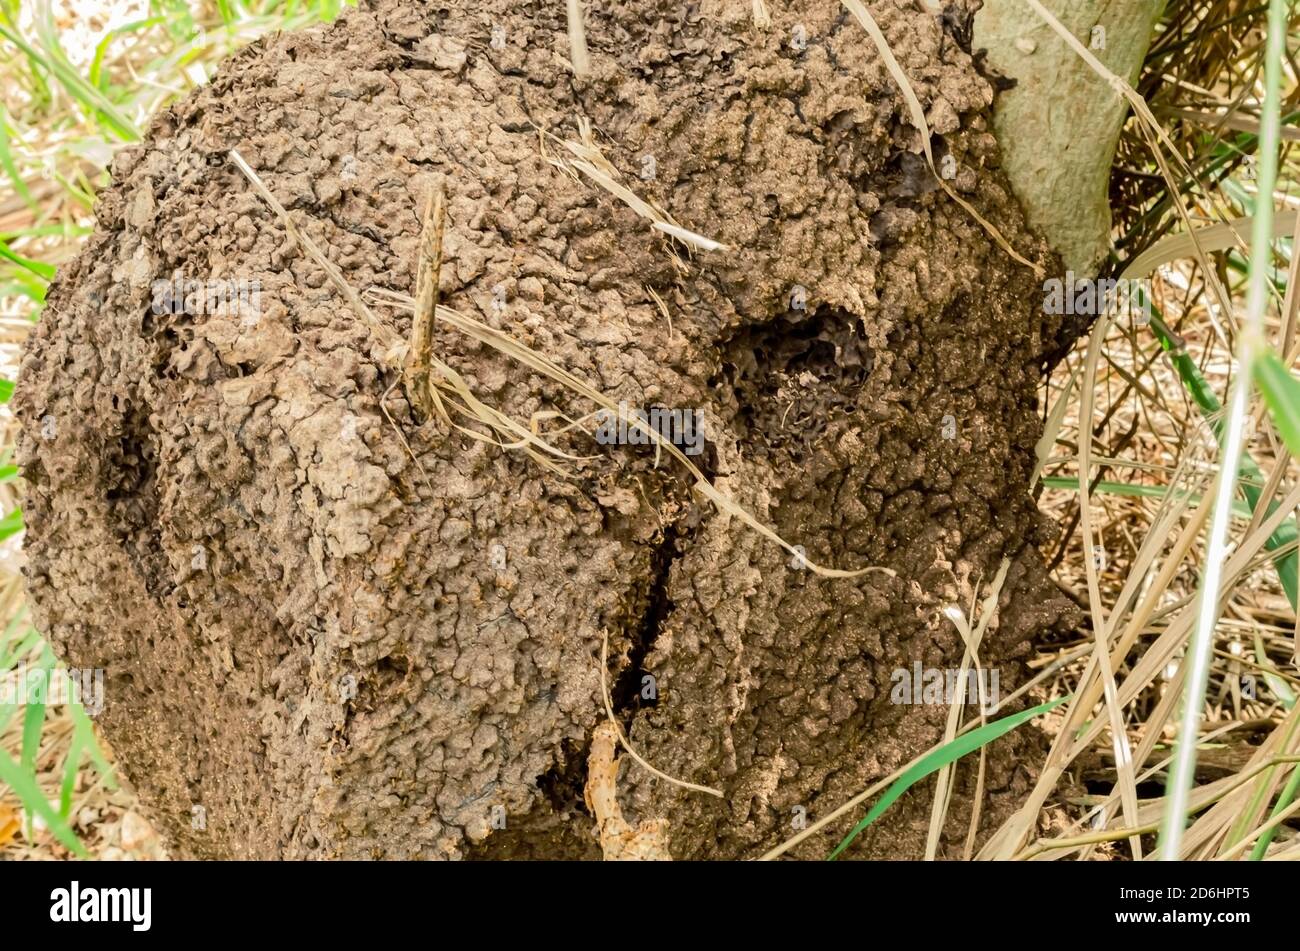 Termites makes a large nest onto the stump of a tree.  At the side of the nest are ruptures from which the insects are crawling out. Stock Photo